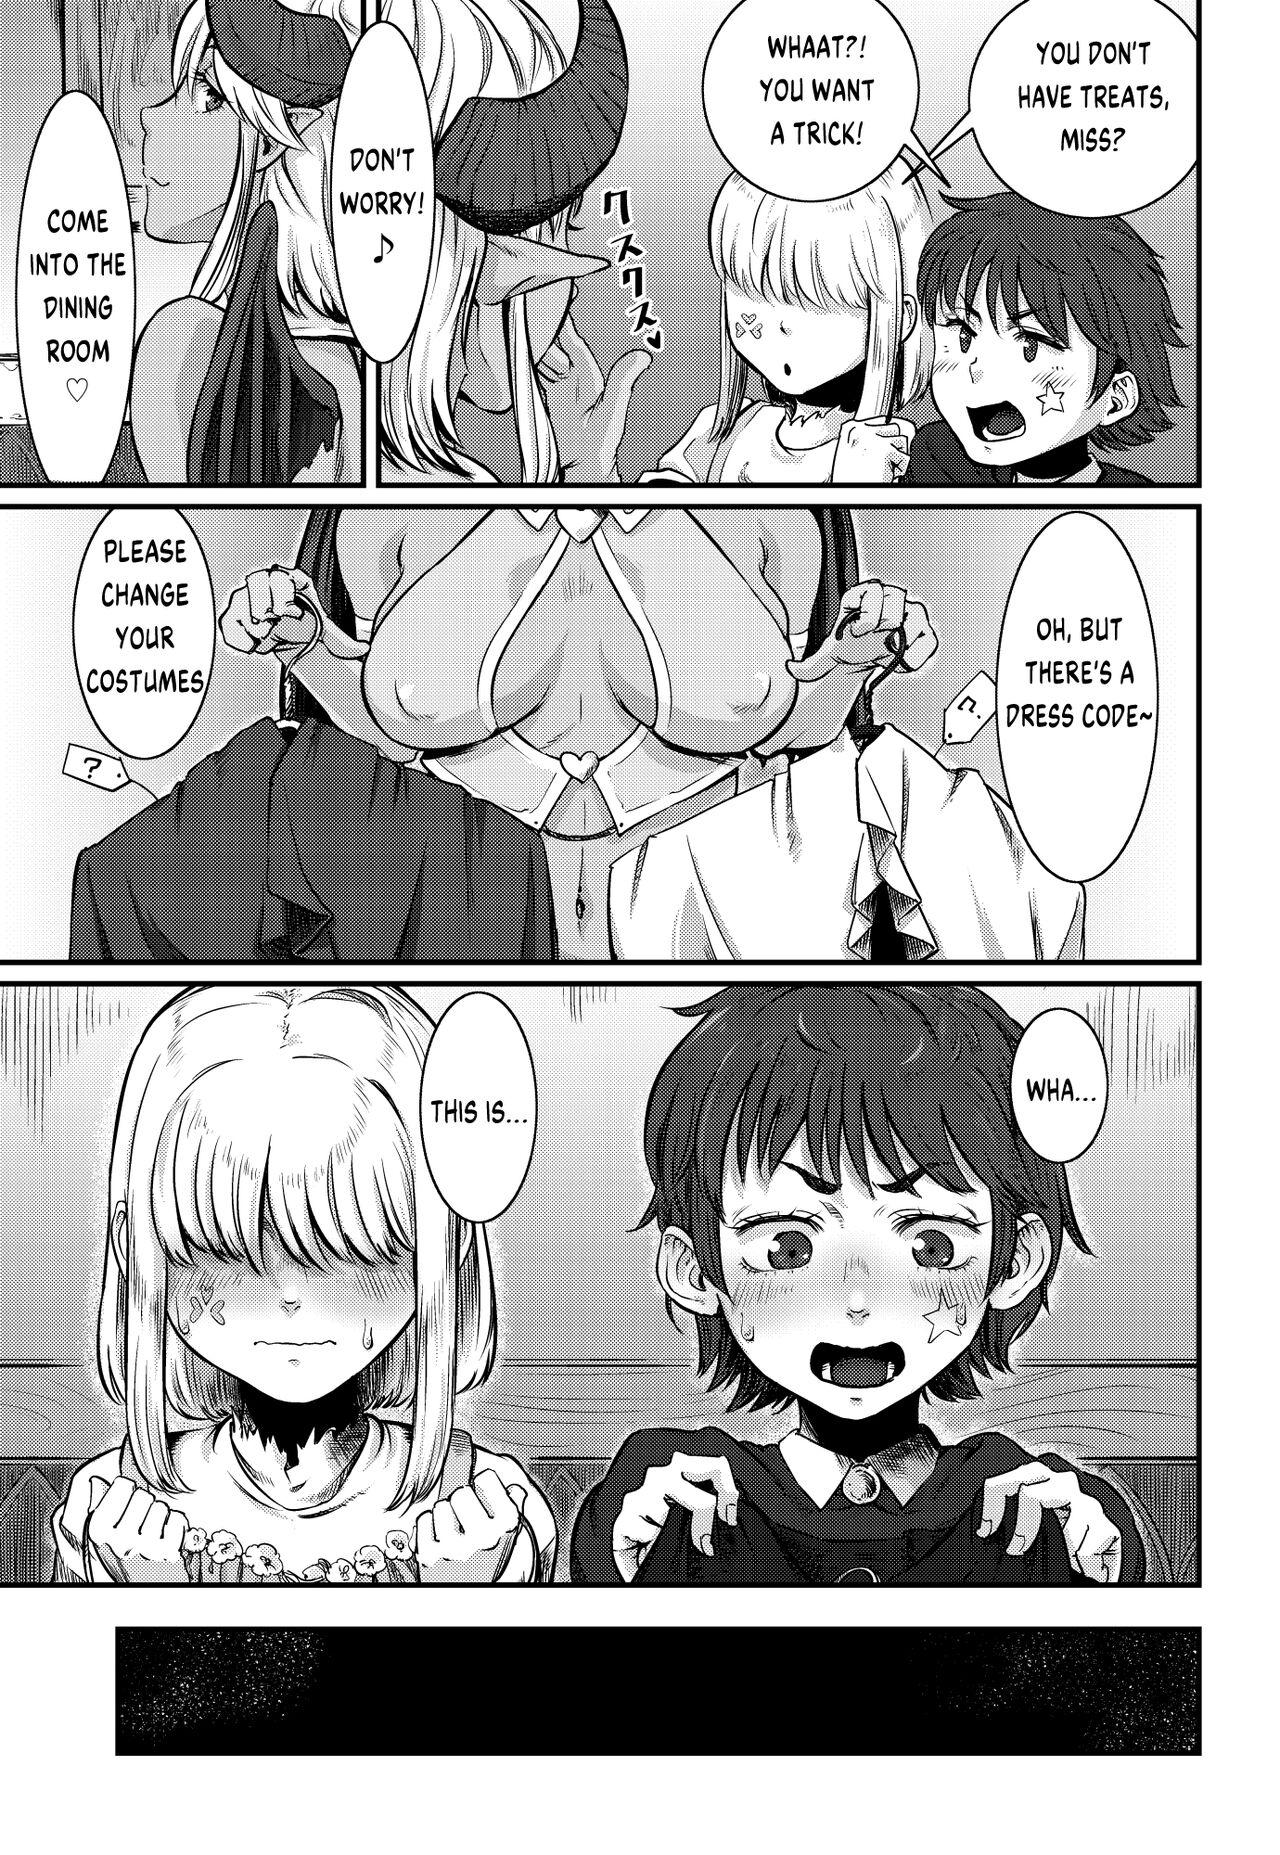 Free Porn Amateur No More Treat Lolicon - Page 4